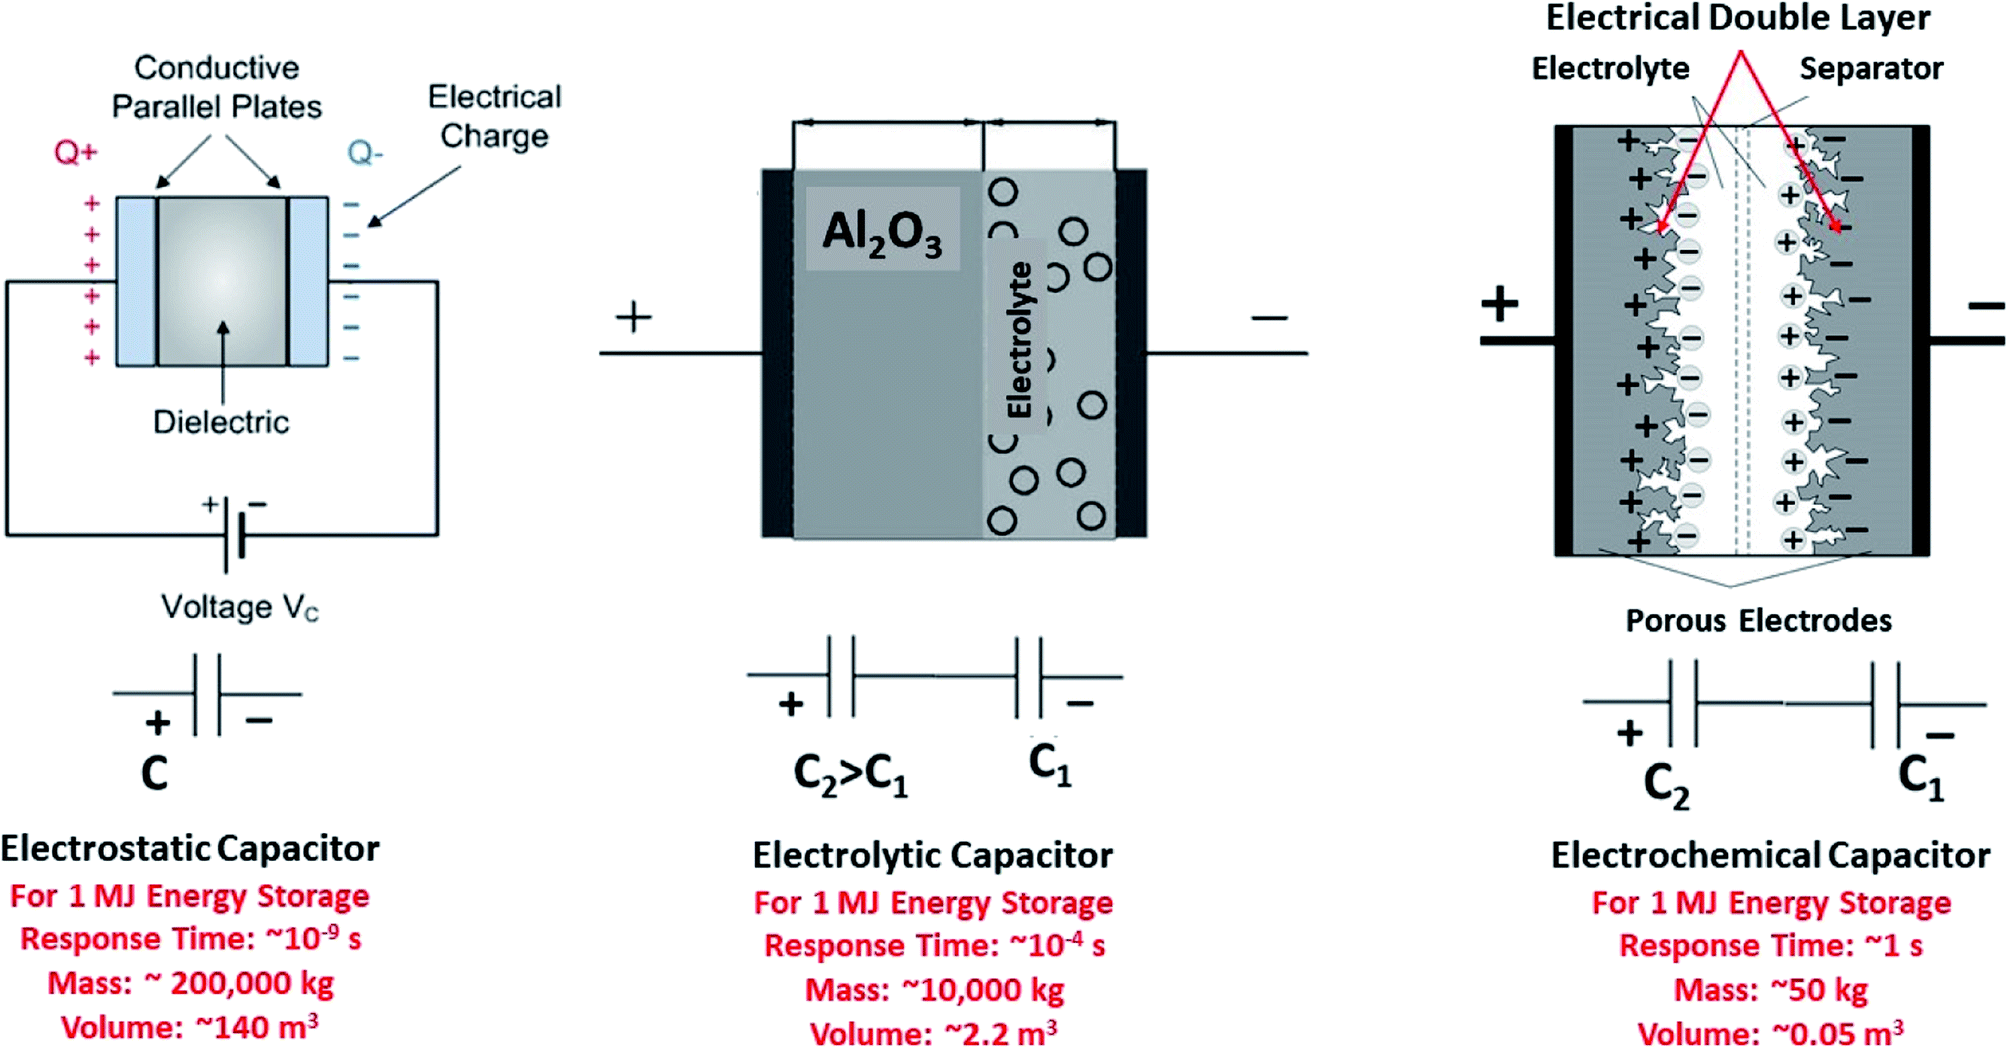 4 Schematic illustration of electrical double layer